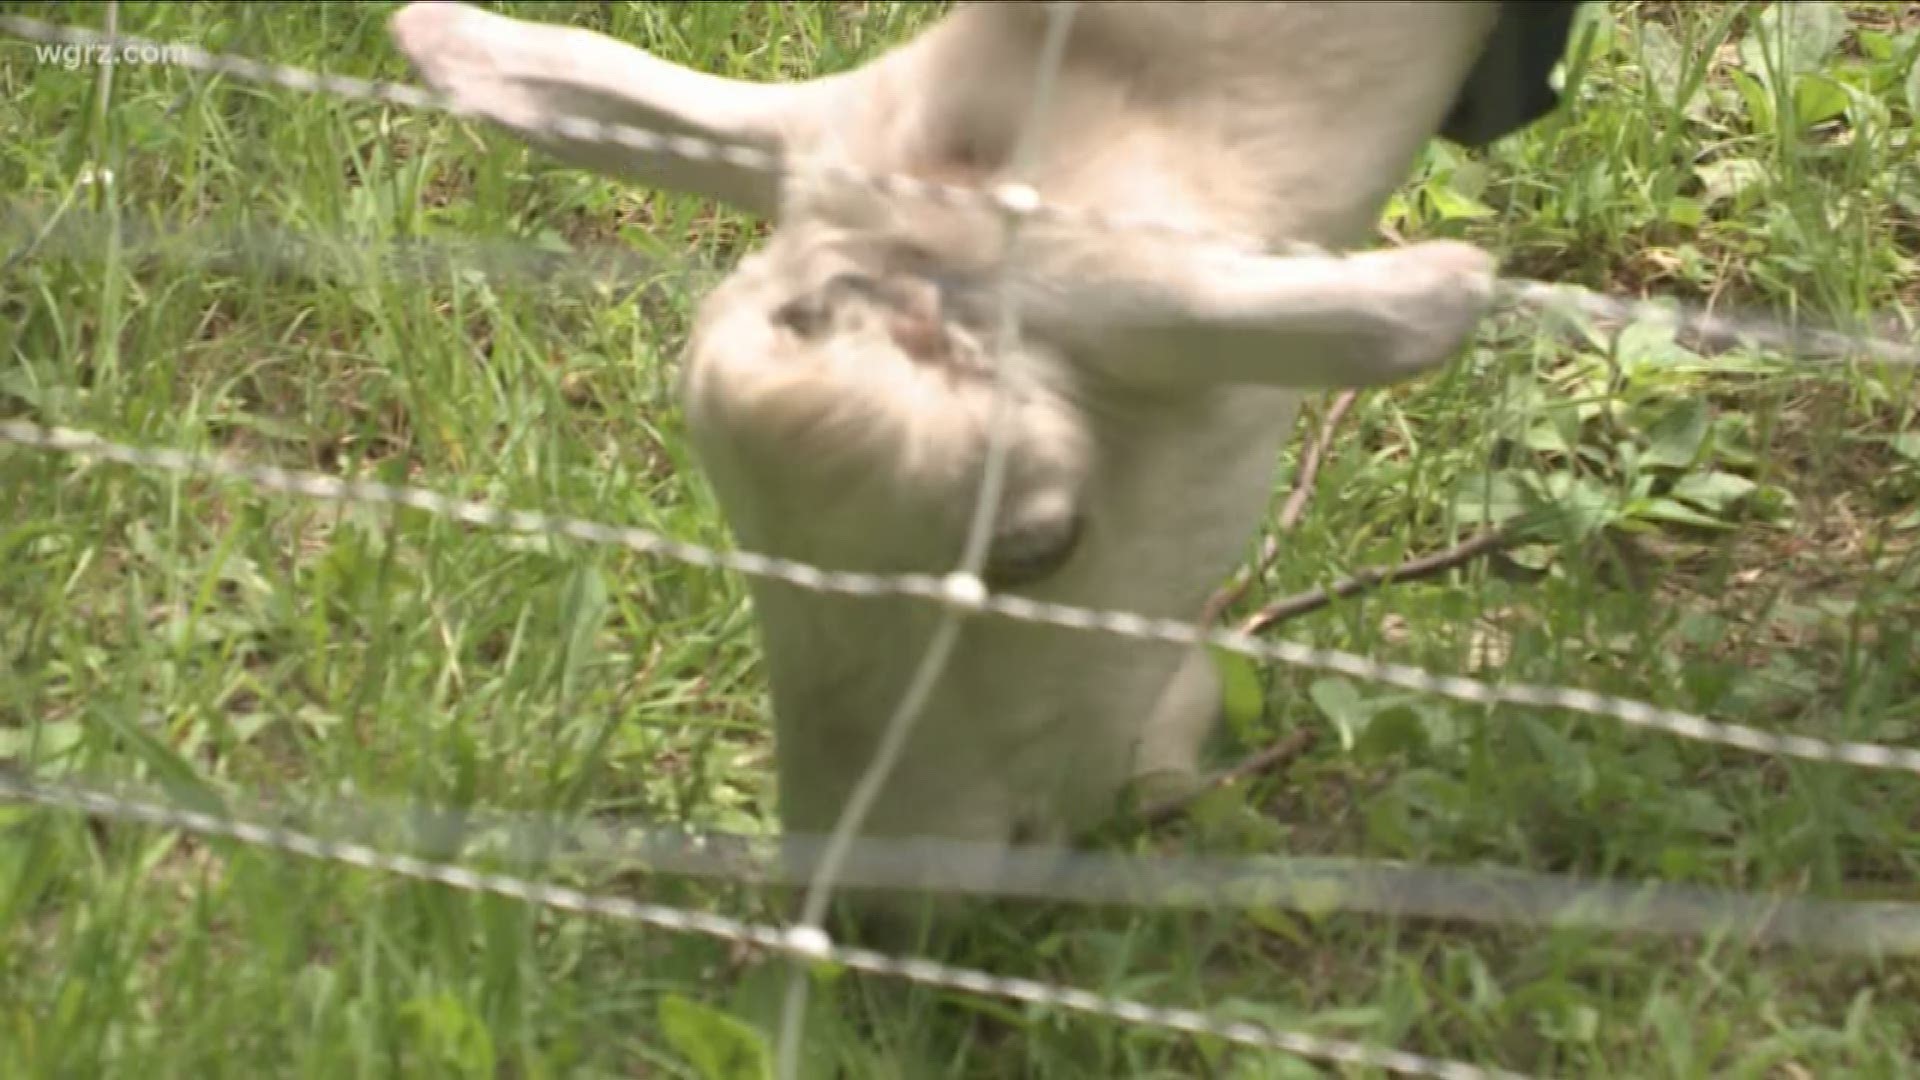 The Goats at "Let's Goat Buffalo" are part of the first of its kind program in Buffalo that's using goats for landscaping!